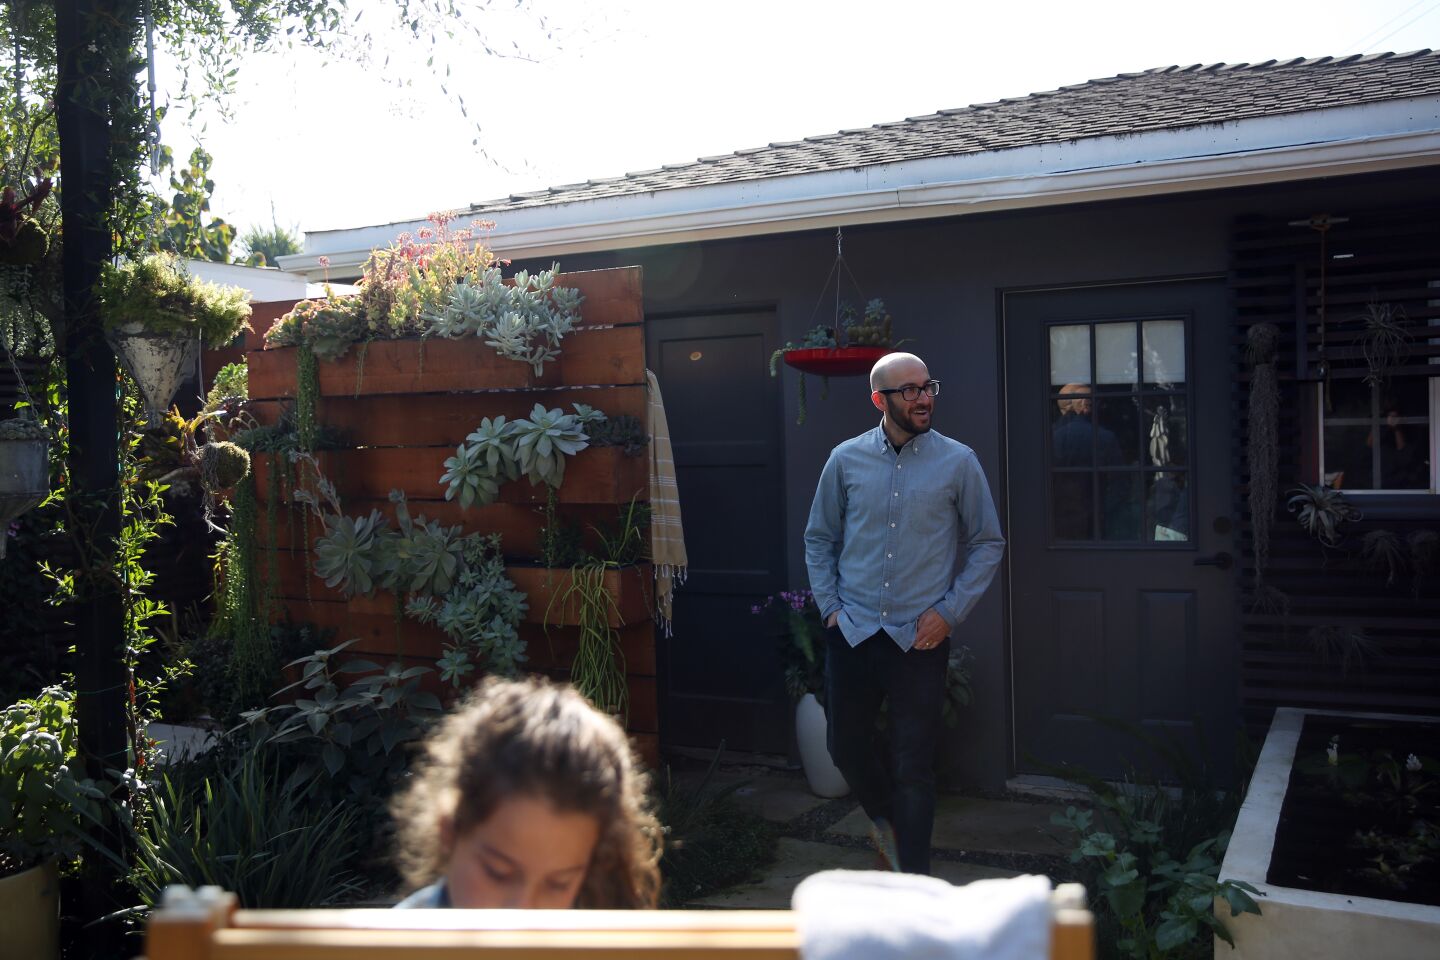 Nili Glatstein, 7, colors on an easel with her dad, Jeremy Glatstein, right, in the backyard. Garden designer Dustin Gimbel created a custom planter, left, for Jeremy's plant collections.